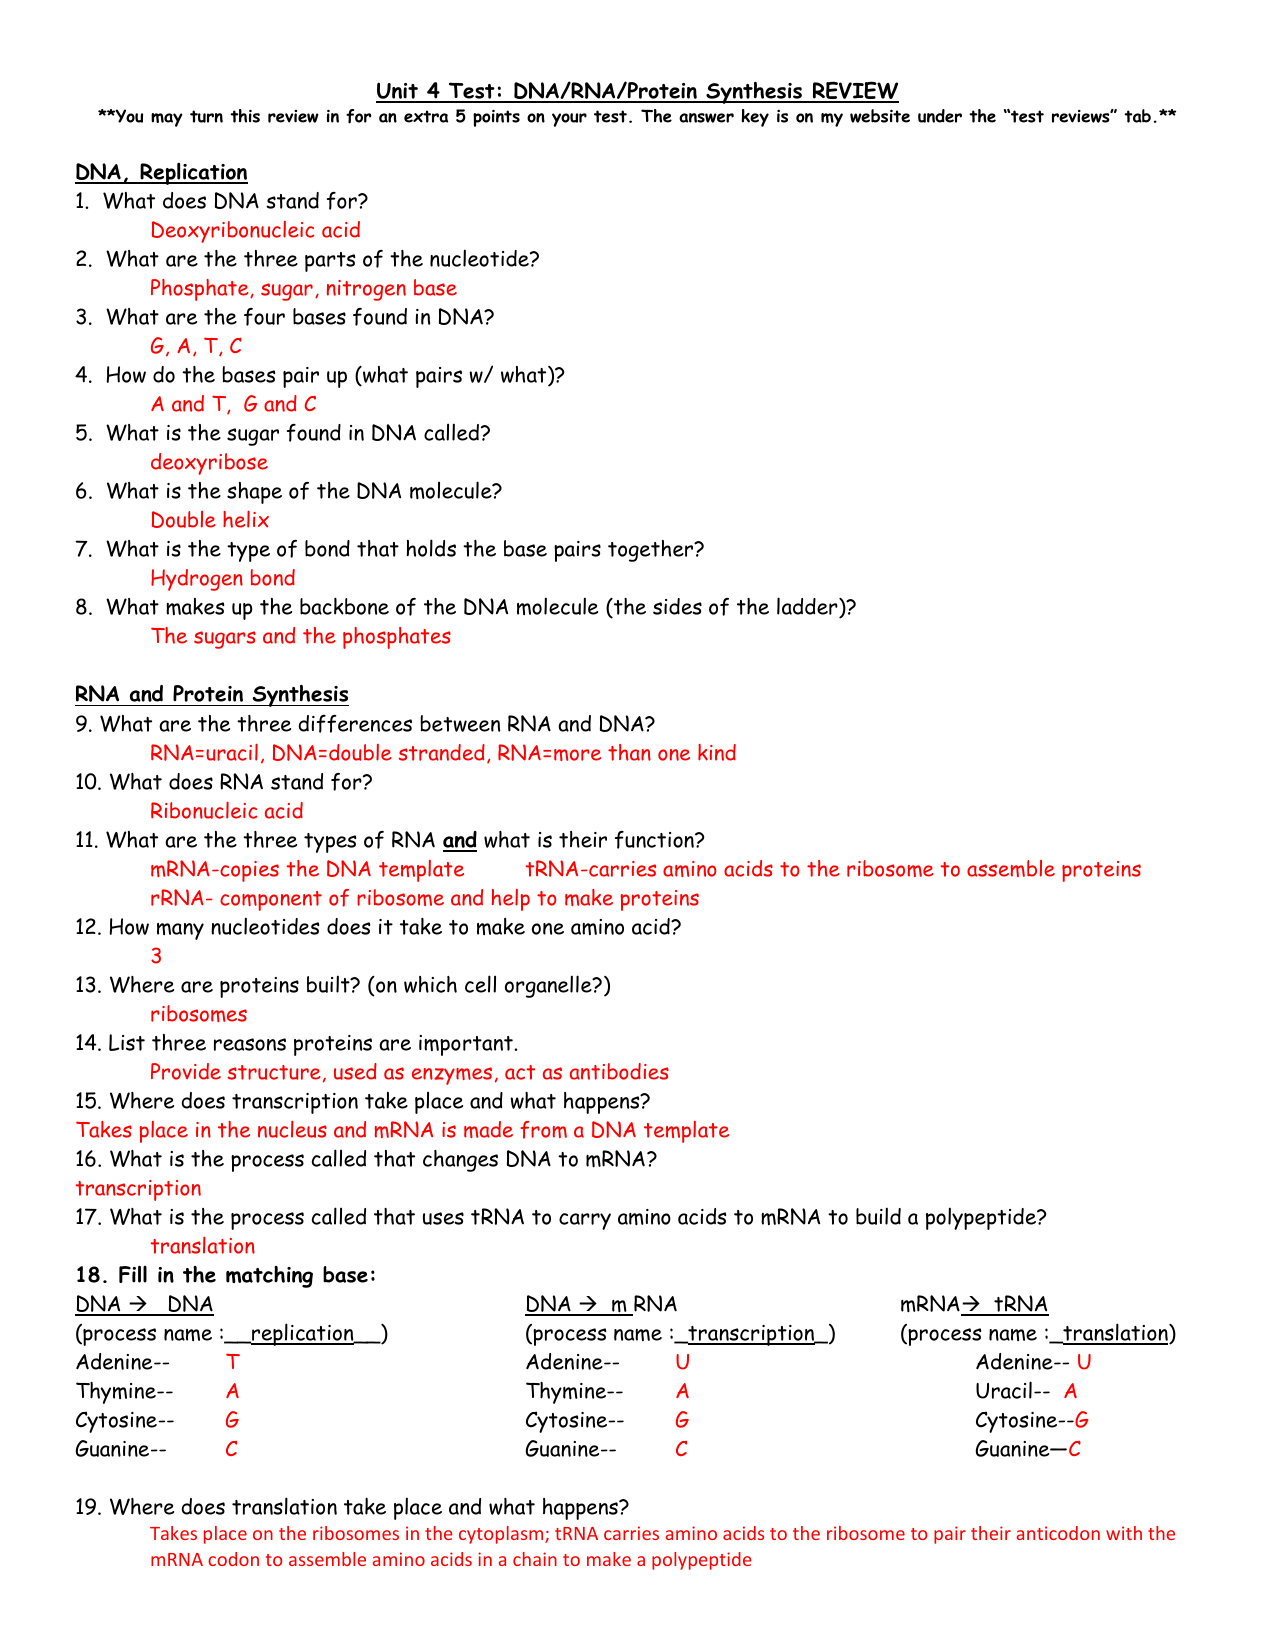 RNA and Protein Synthesis In Protein Synthesis Review Worksheet Answers